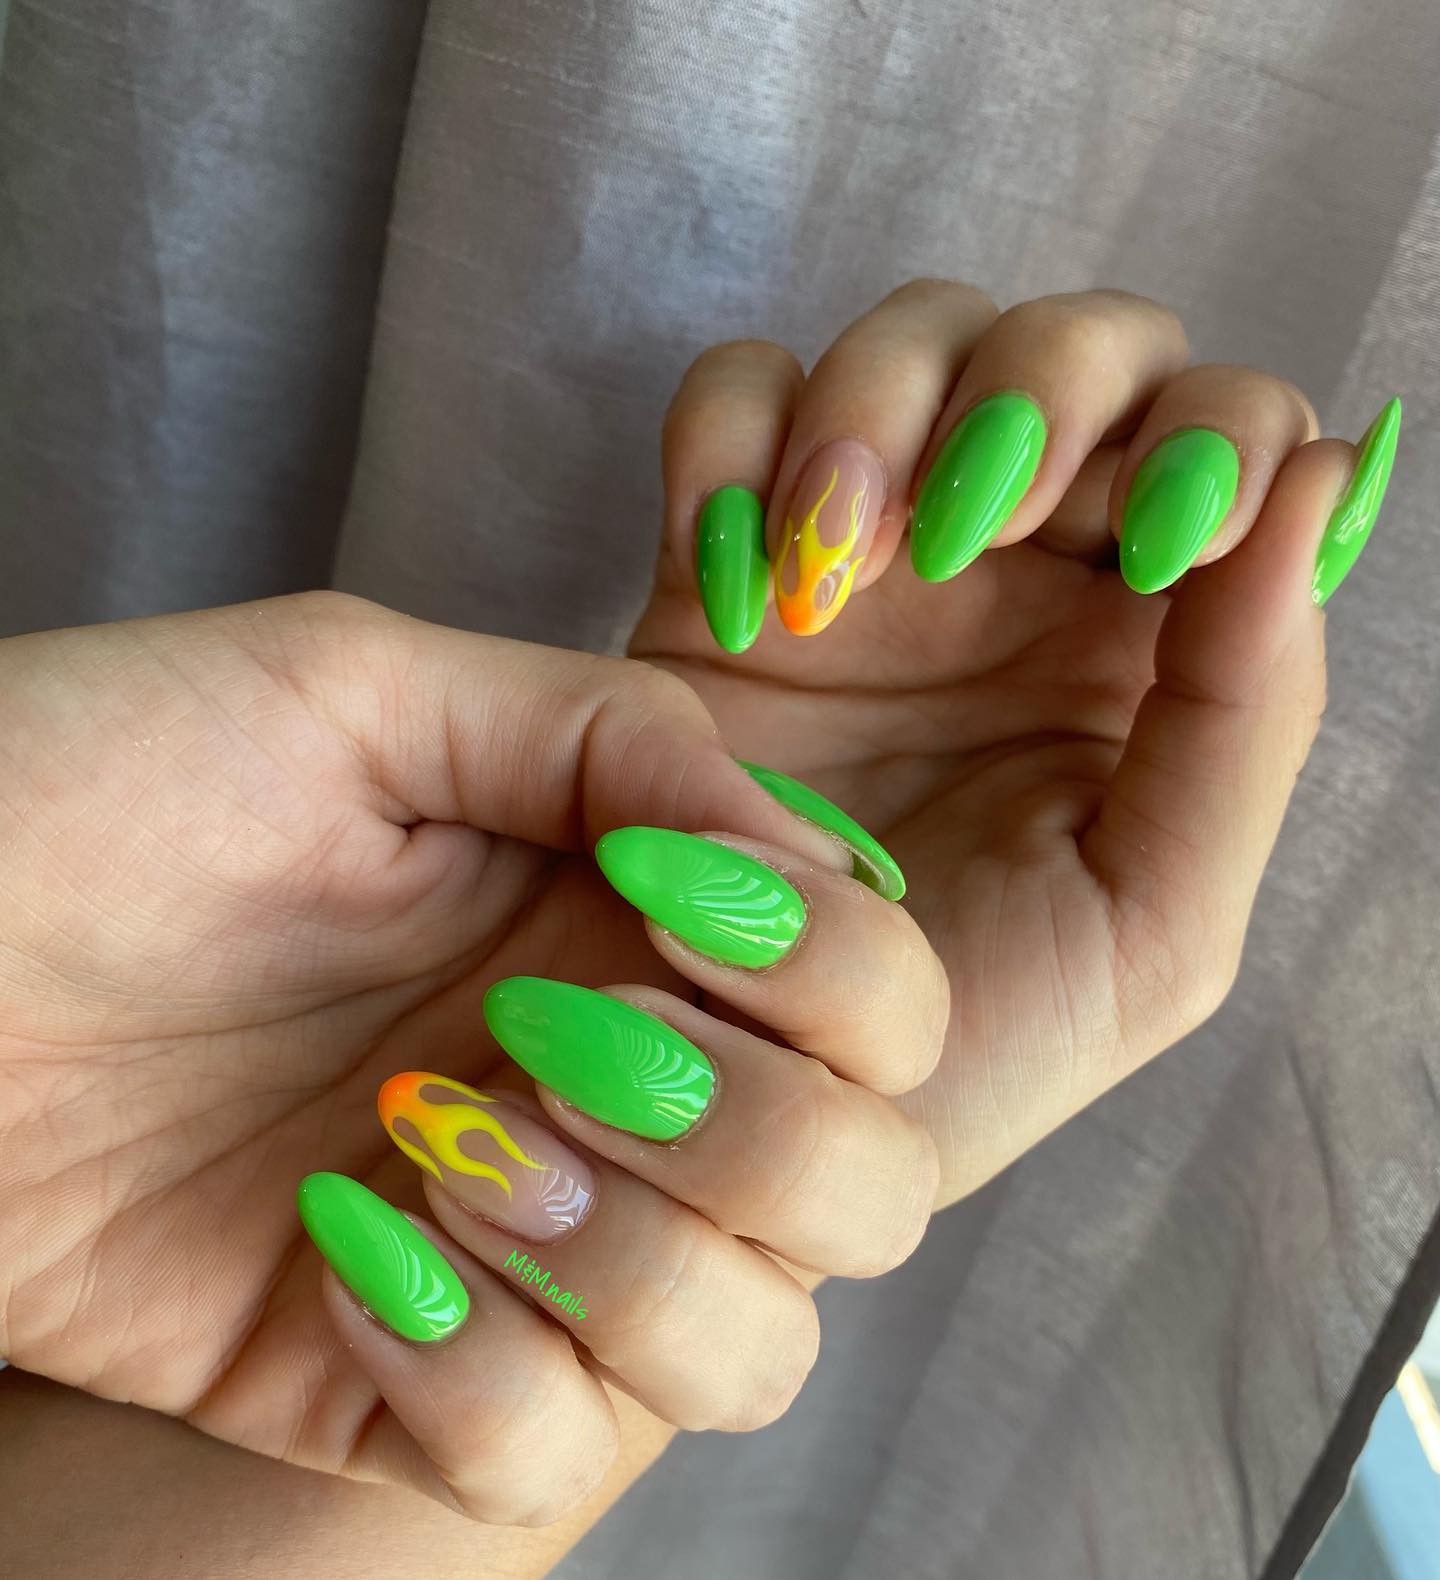 Feeling the summer is easy with those nails. Super bright nails and a flame nail art will take your look to a new level!